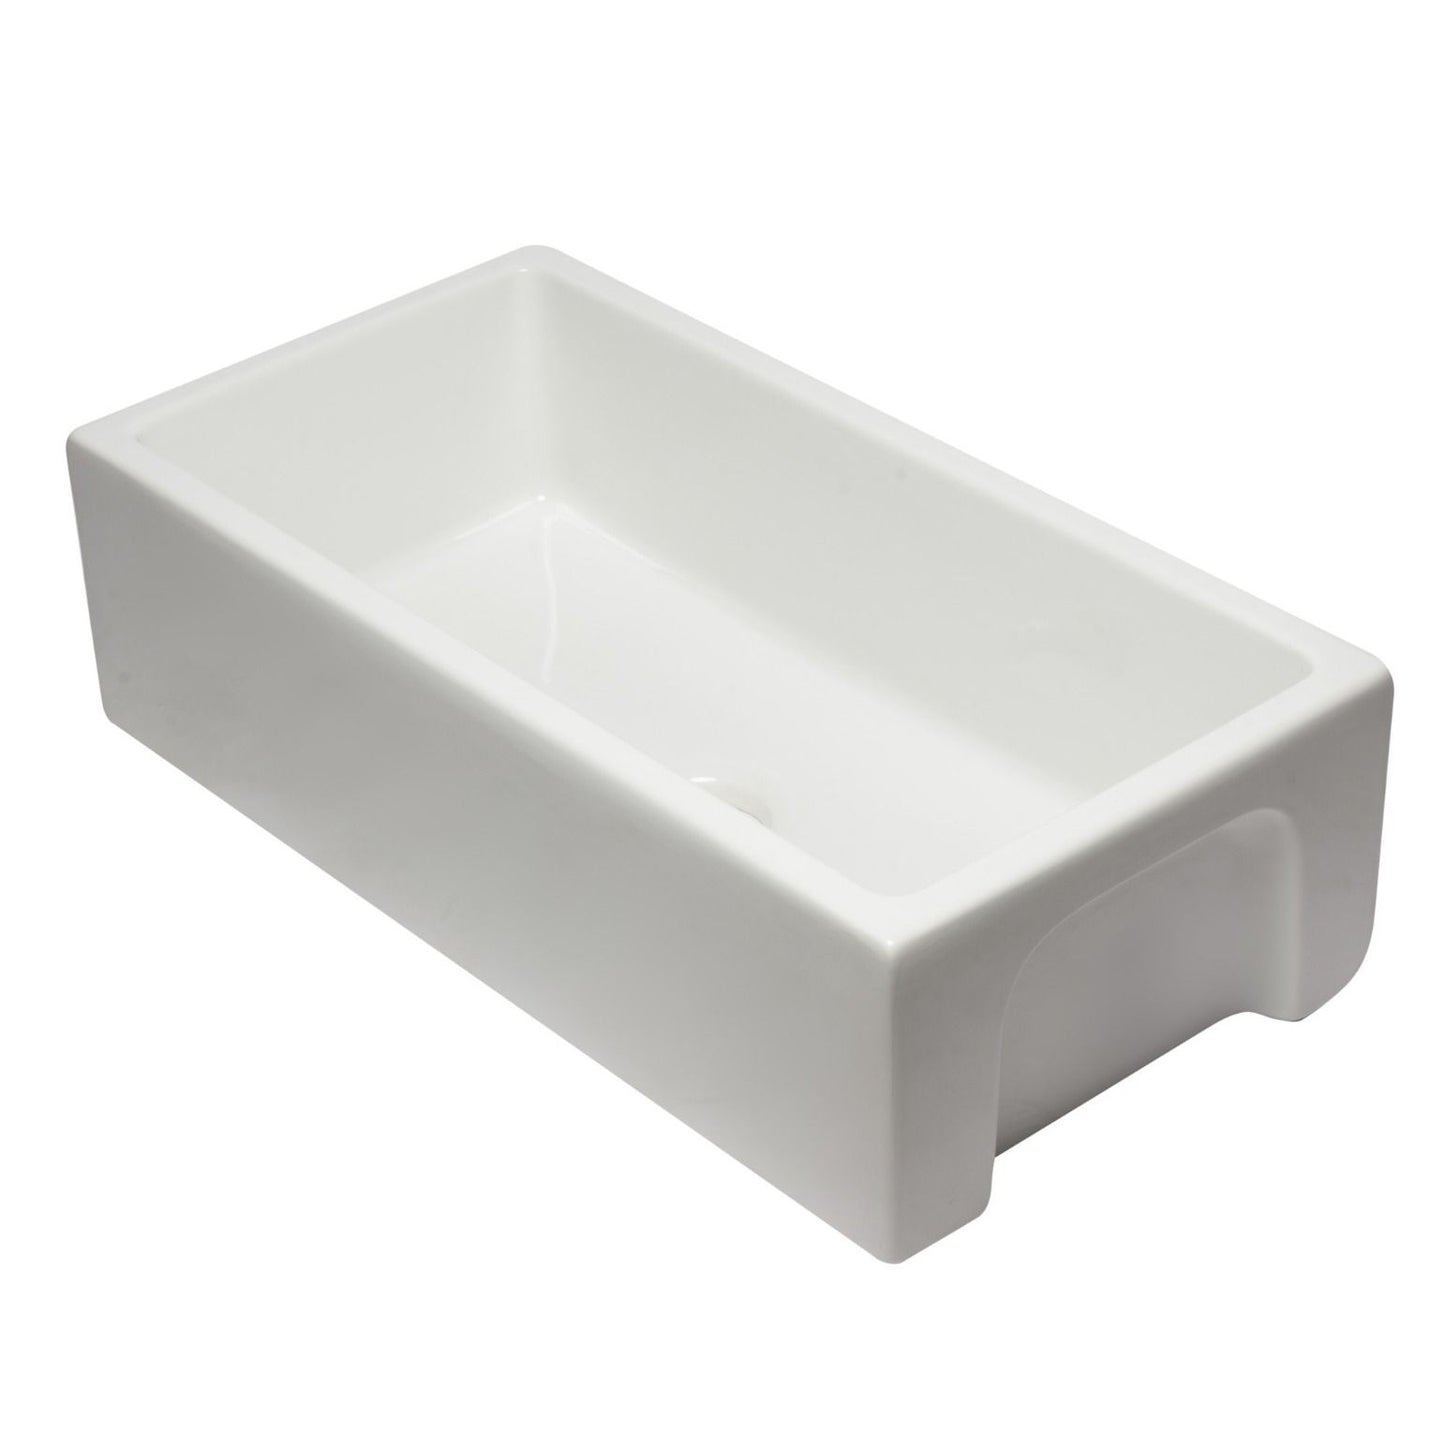 ALFI Brand AB3618HS-W 36 inch White Reversible Smooth / Fluted Single Bowl Fireclay Farm Sink